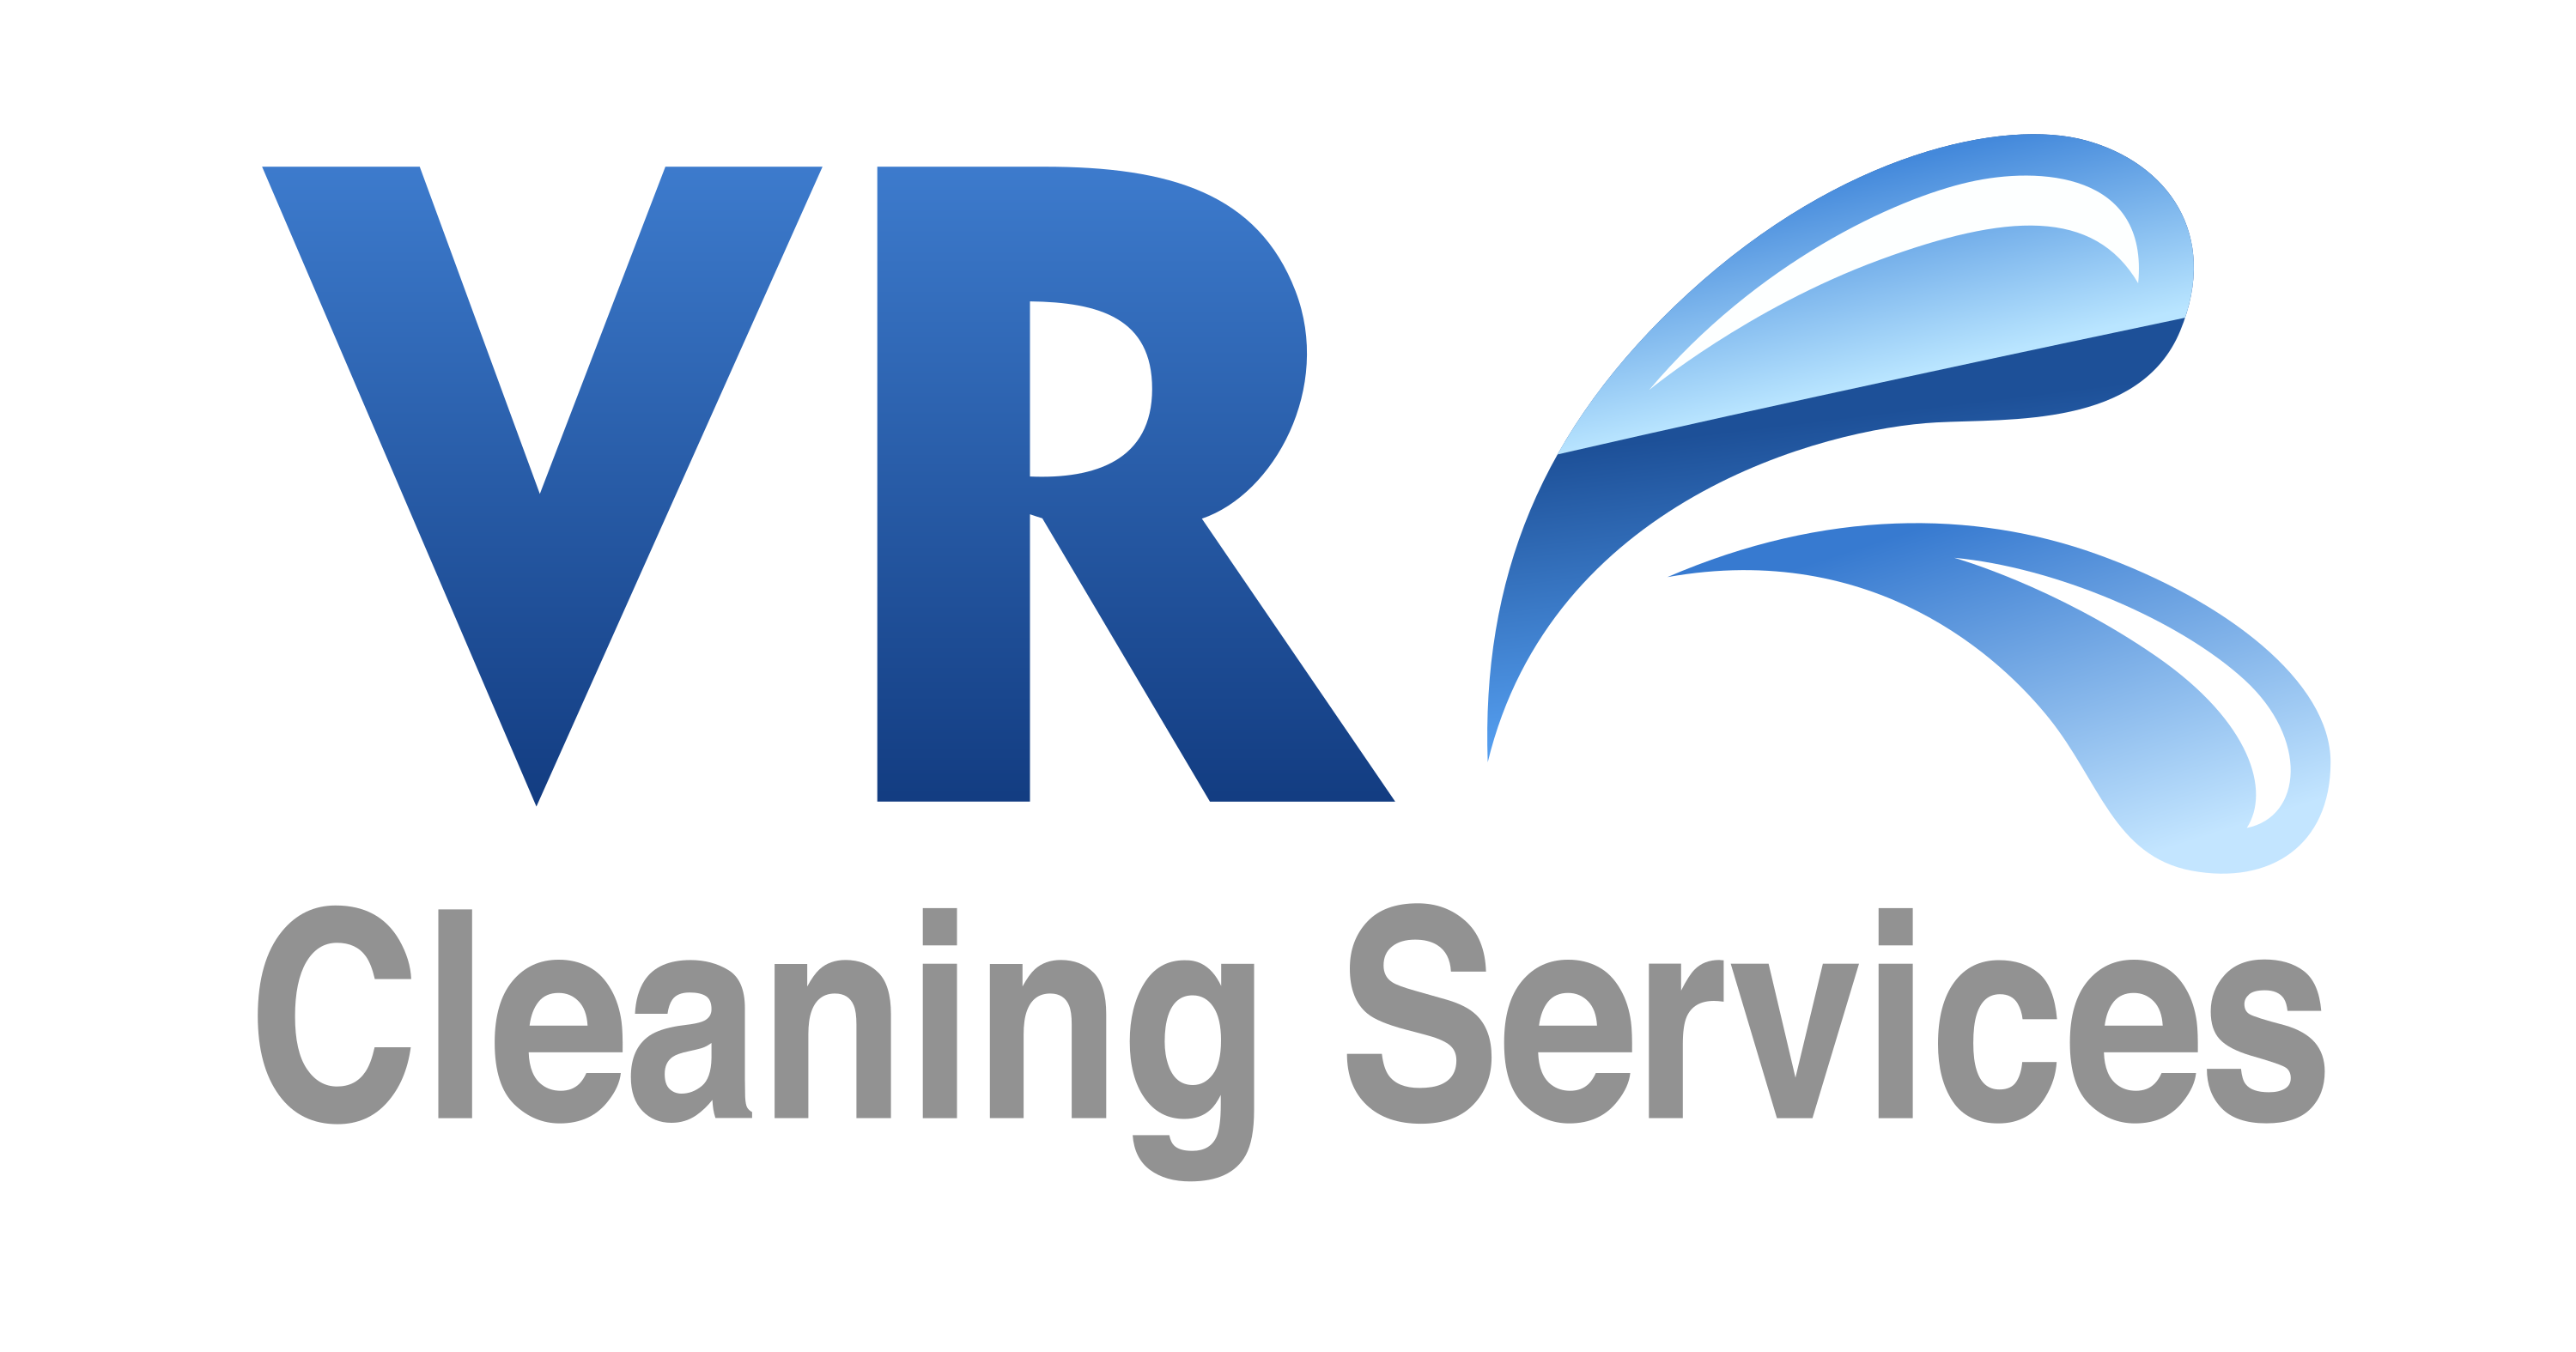 VR Cleaning Services logo